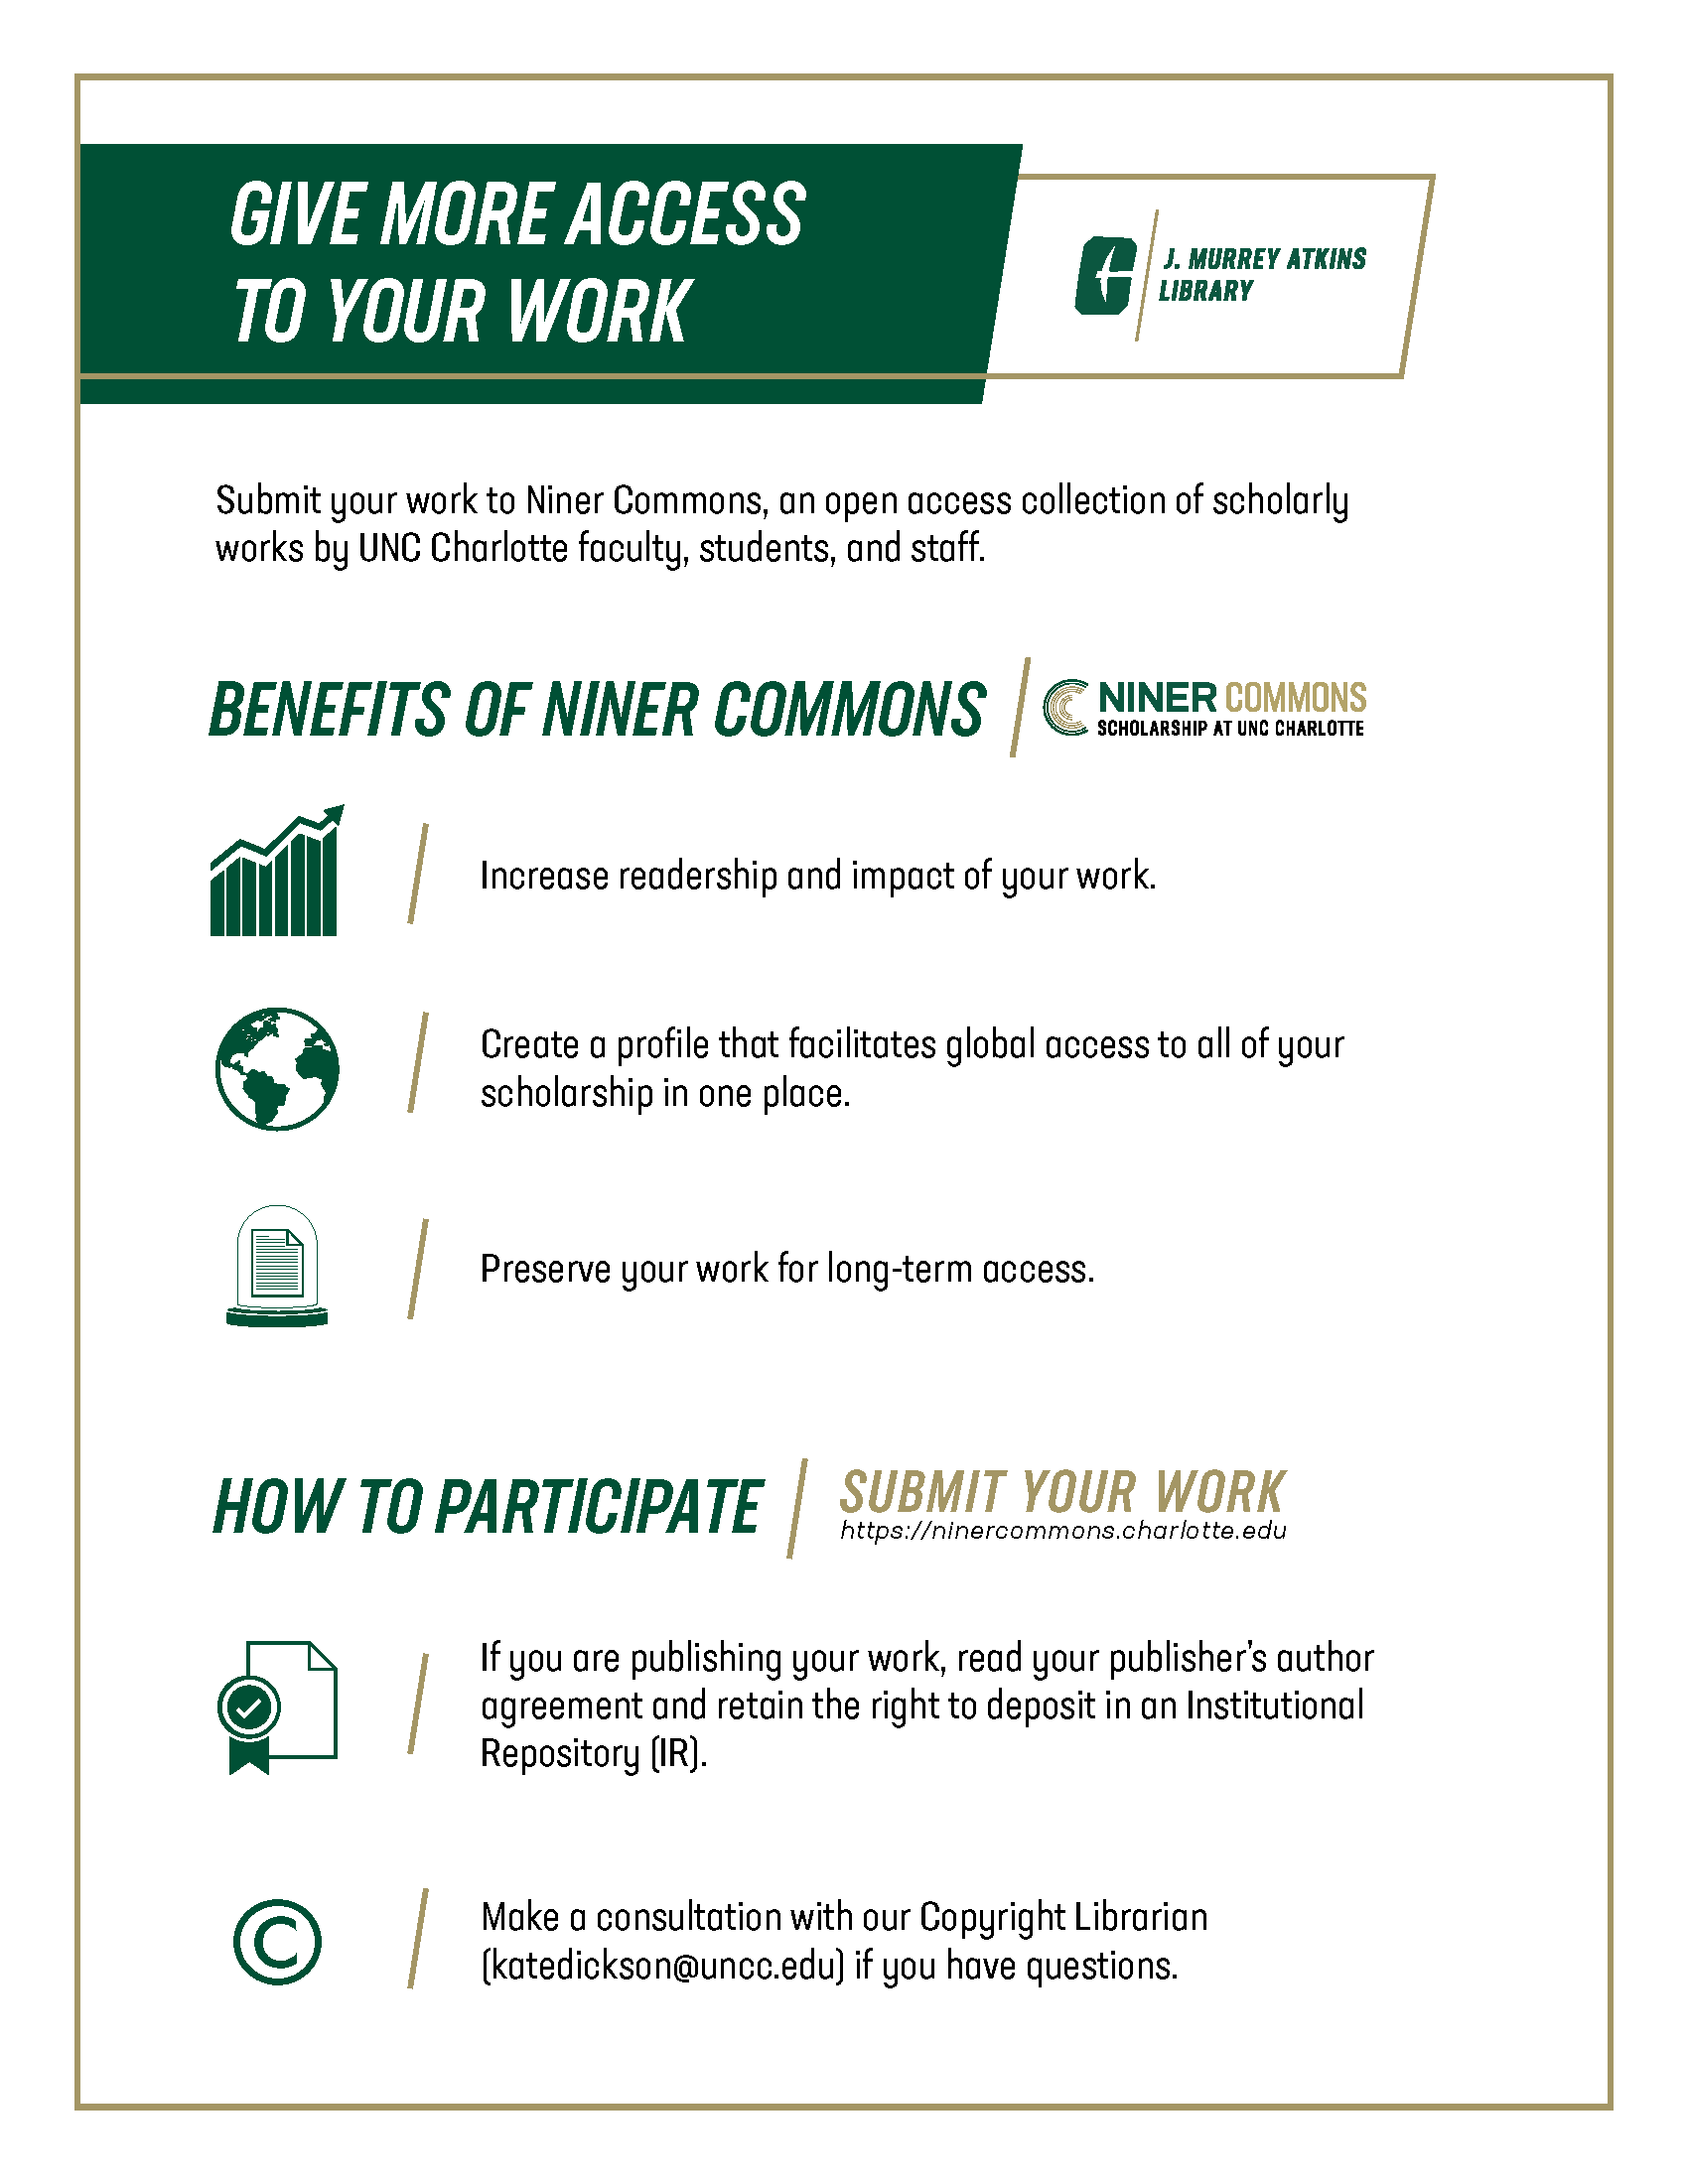 Infographic describing benefits of Niner Commons and how to participate